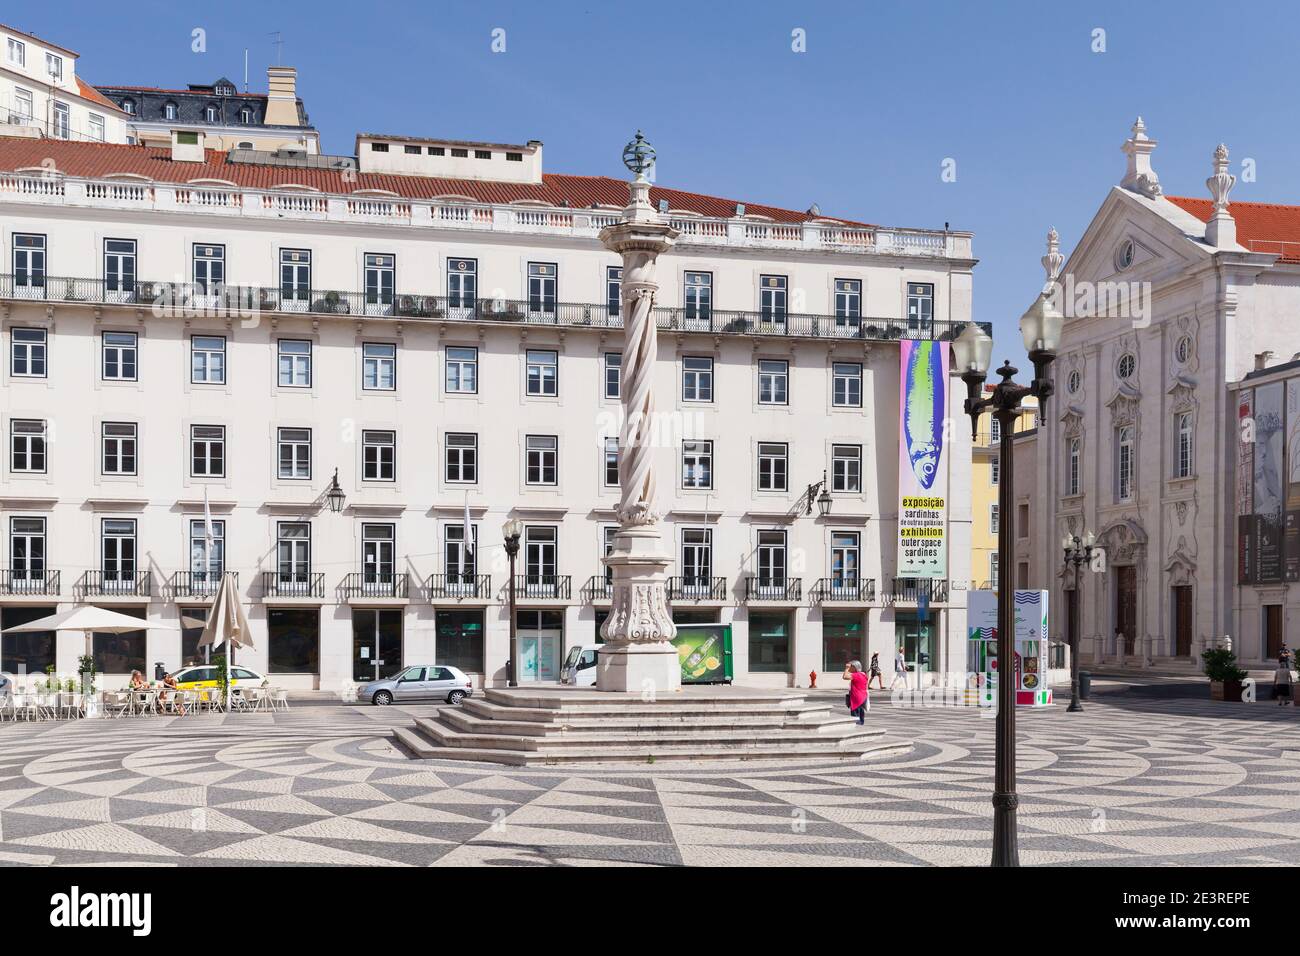 Lisbon, Portugal - August 15, 2017: Pillory of Lisbon at the Praca do Municipio, ordinary people are on the street Stock Photo